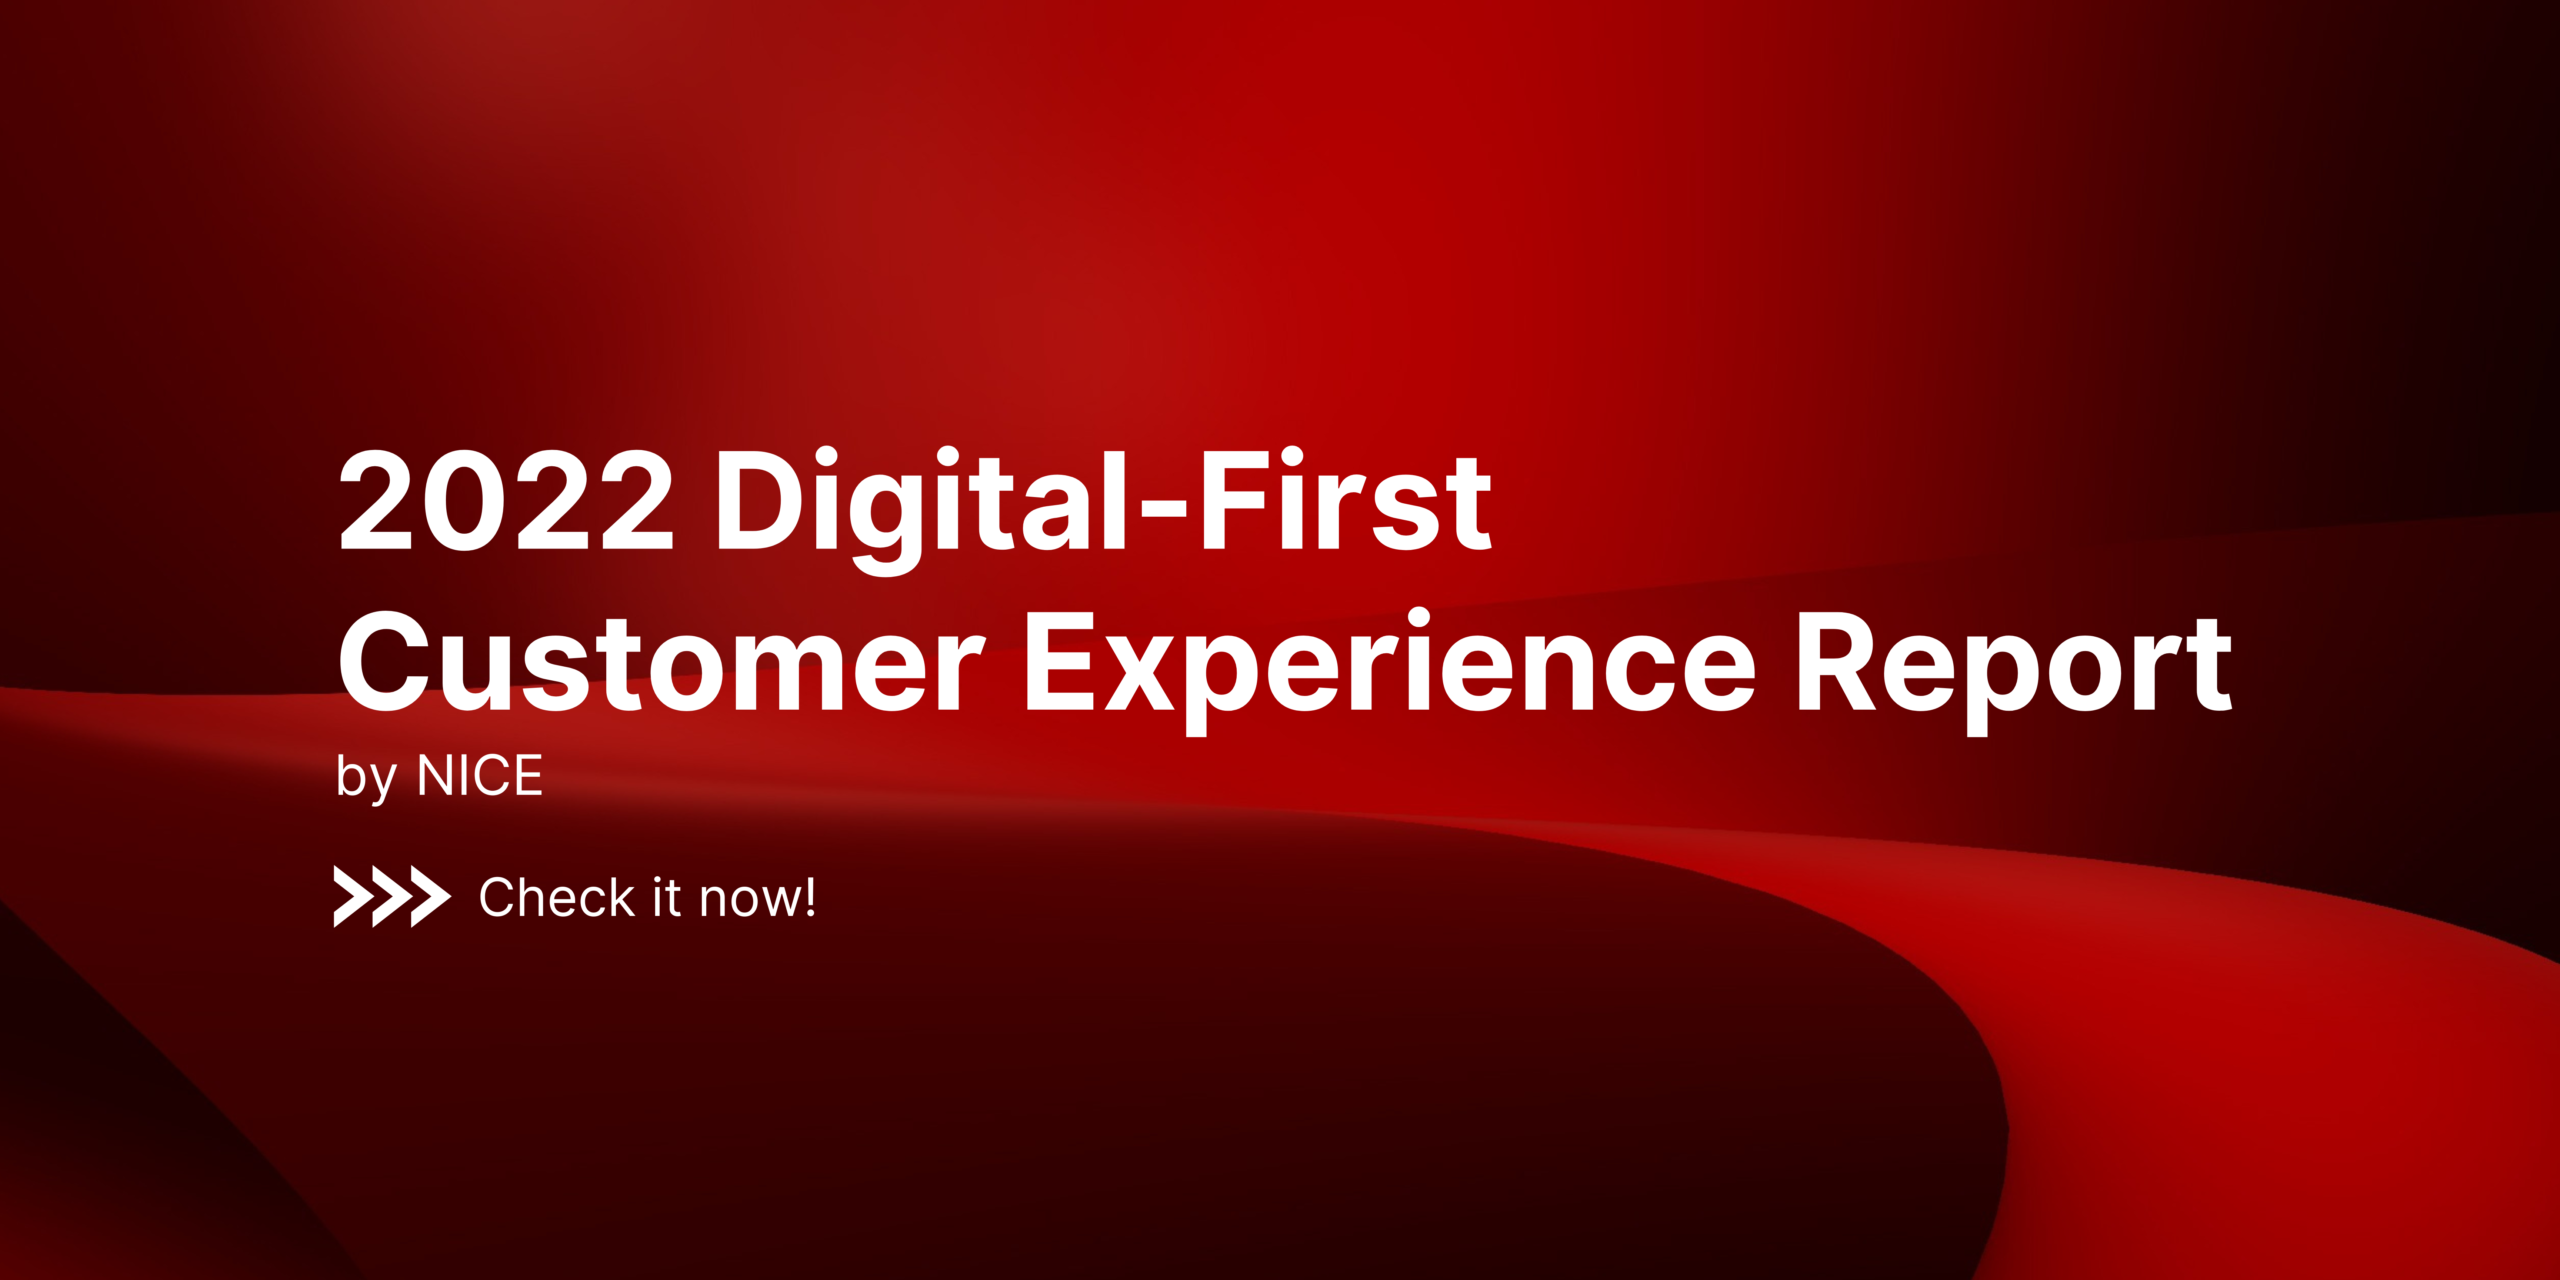 2022 Digital-First Customer Experience Report